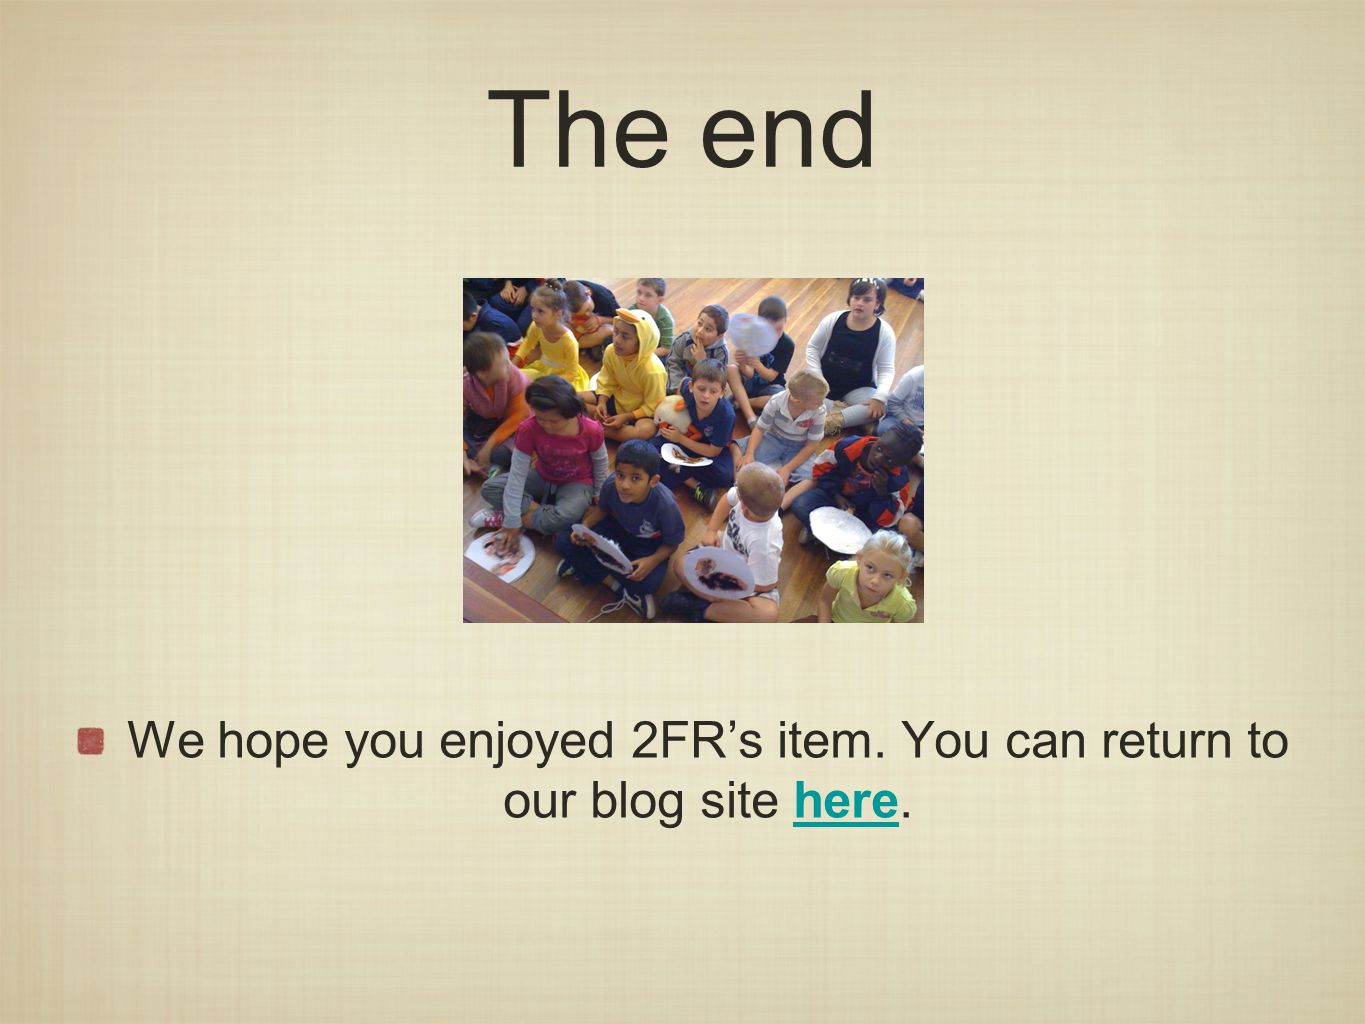 The end We hope you enjoyed 2FR’s item. You can return to our blog site here.here